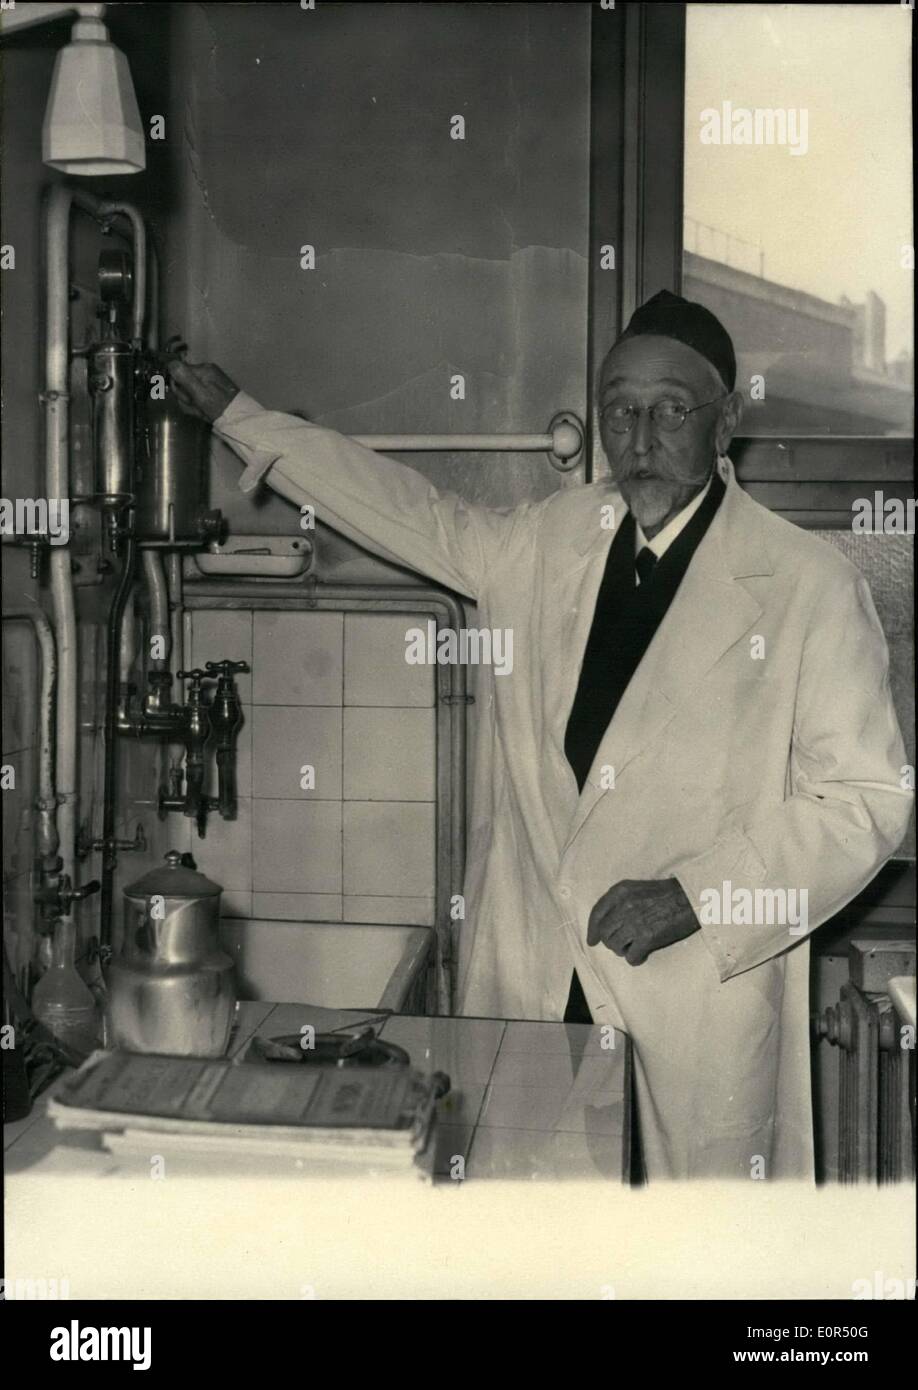 Mar. 03, 1958 - Famous French Scientist Rewarded: M. Camille Guerin, the famous French Scientist who invented, in Collaboration Stock Photo